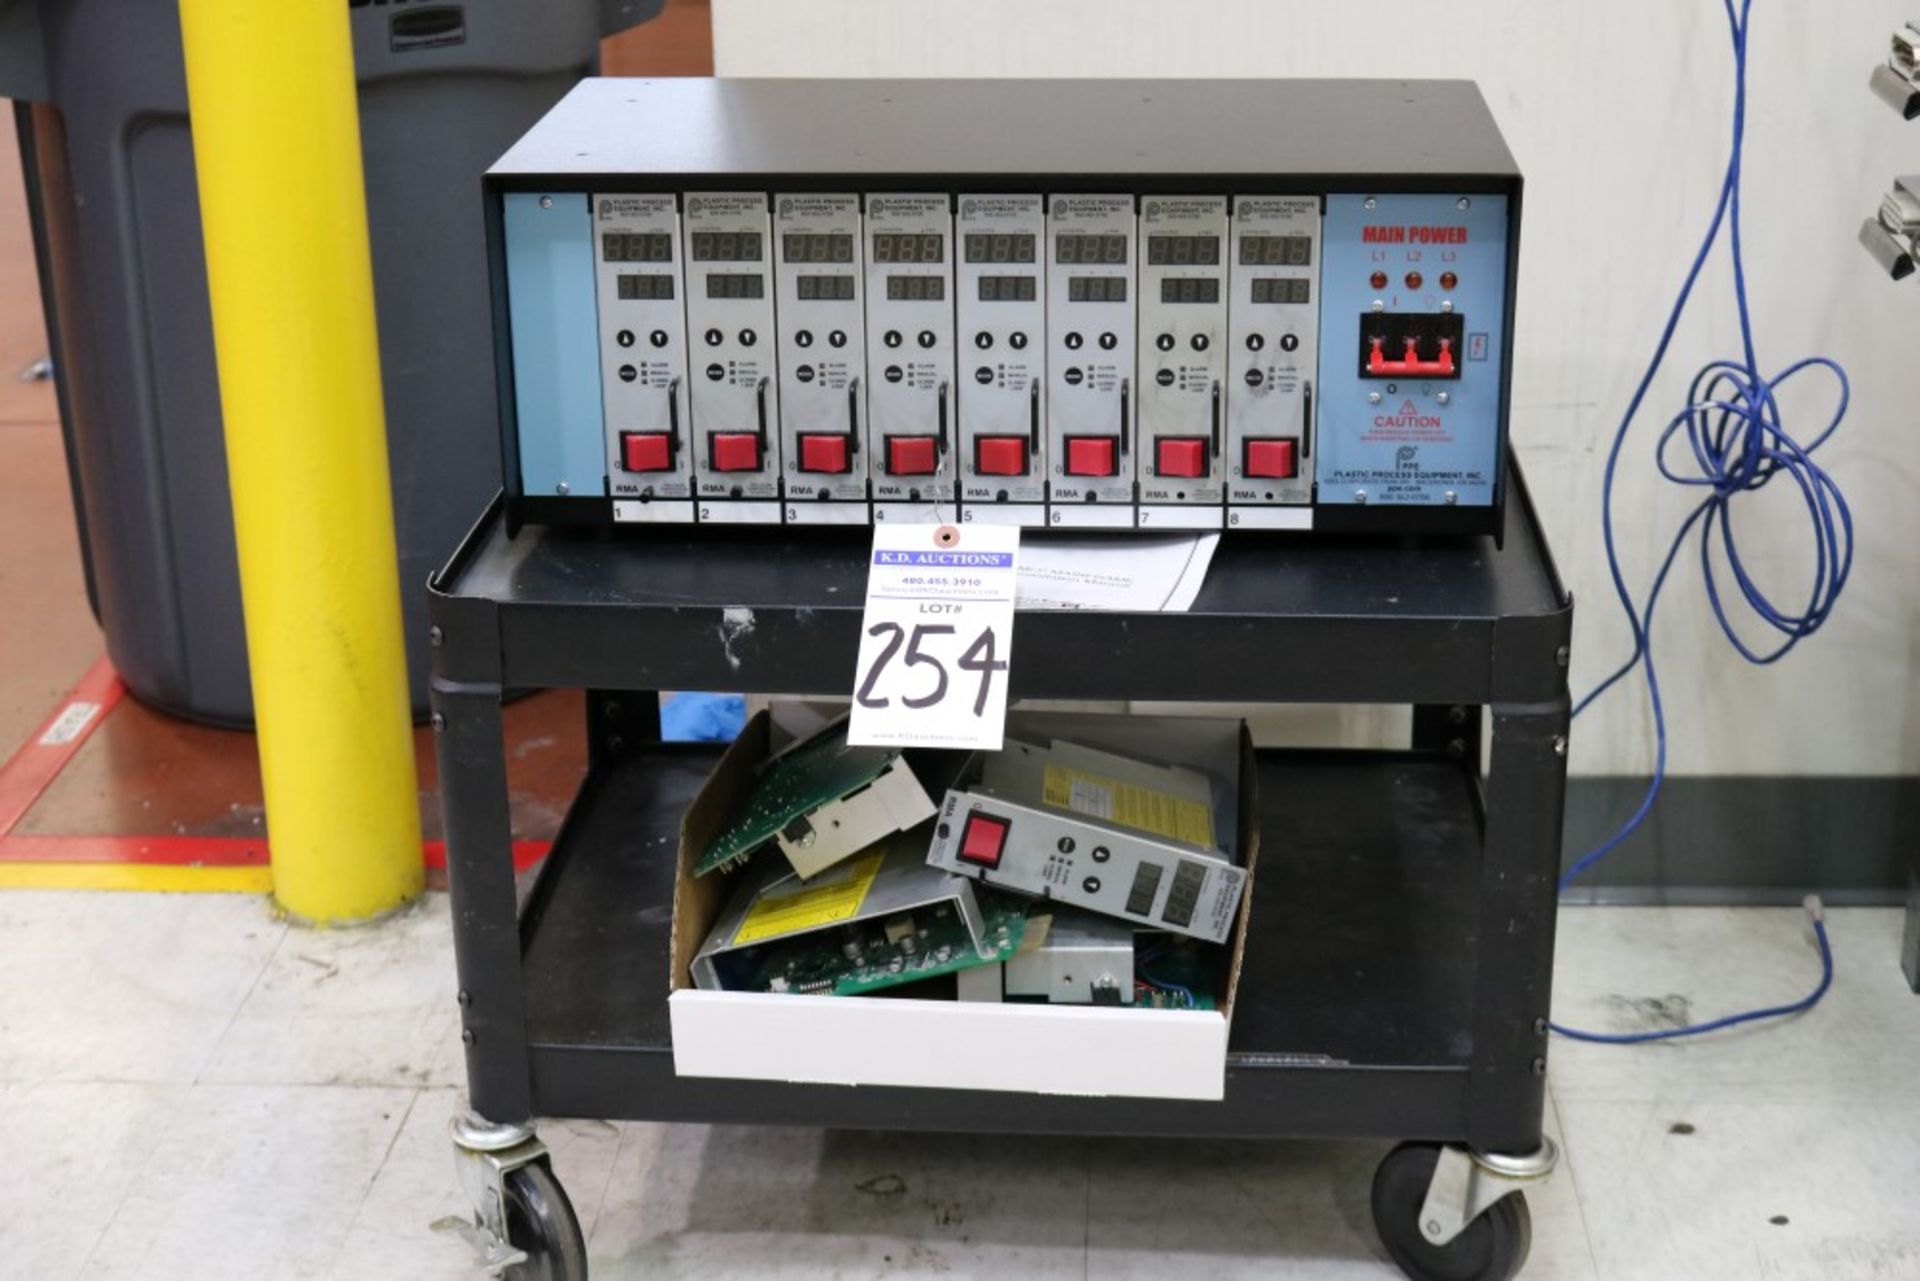 8 Zone Plastic Process Equipment Hot Runner Controller w/ Spare Boards on Metal Rolling Cart - Image 4 of 4